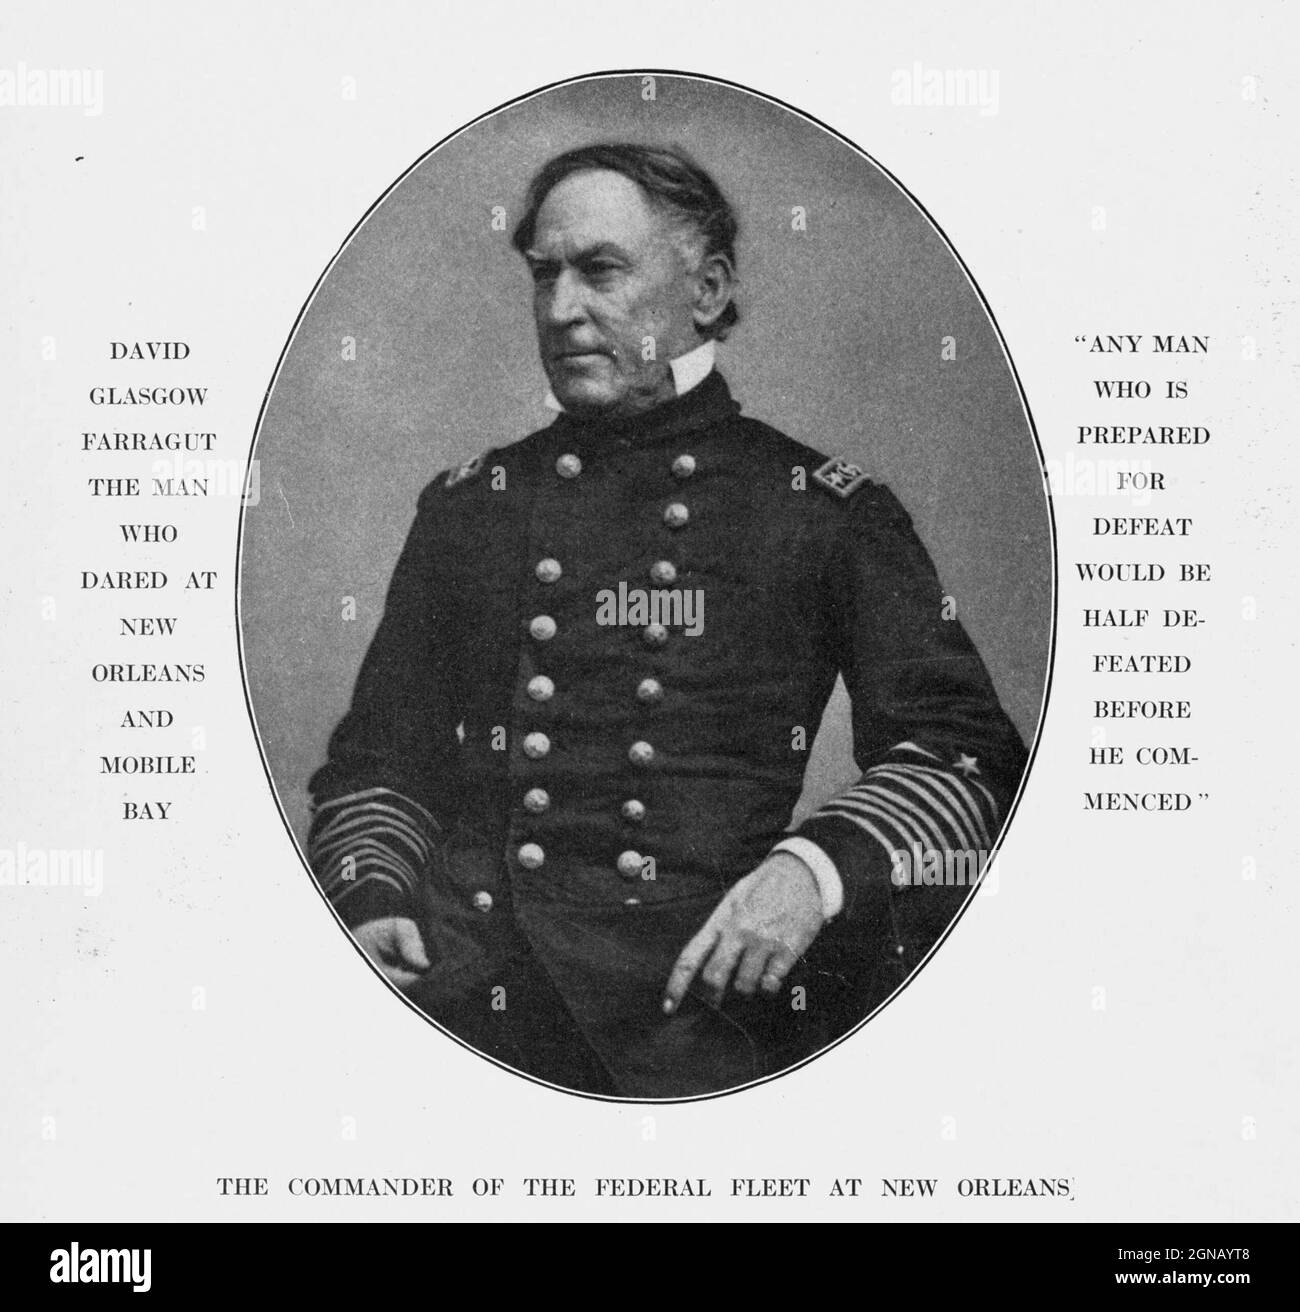 David Glasgow Farragut (July 5, 1801 – August 14, 1870) was a flag officer of the United States Navy during the American Civil War. He was the first rear admiral, vice admiral, and admiral in the United States Navy. He is remembered for his order at the Battle of Mobile Bay usually paraphrased as 'Damn the torpedoes, full speed ahead' in U.S. Navy tradition. from the book ' The Civil war through the camera ' hundreds of vivid photographs actually taken in Civil war times, sixteen reproductions in color of famous war paintings. The new text history by Henry W. Elson. A. complete illustrated his Stock Photo